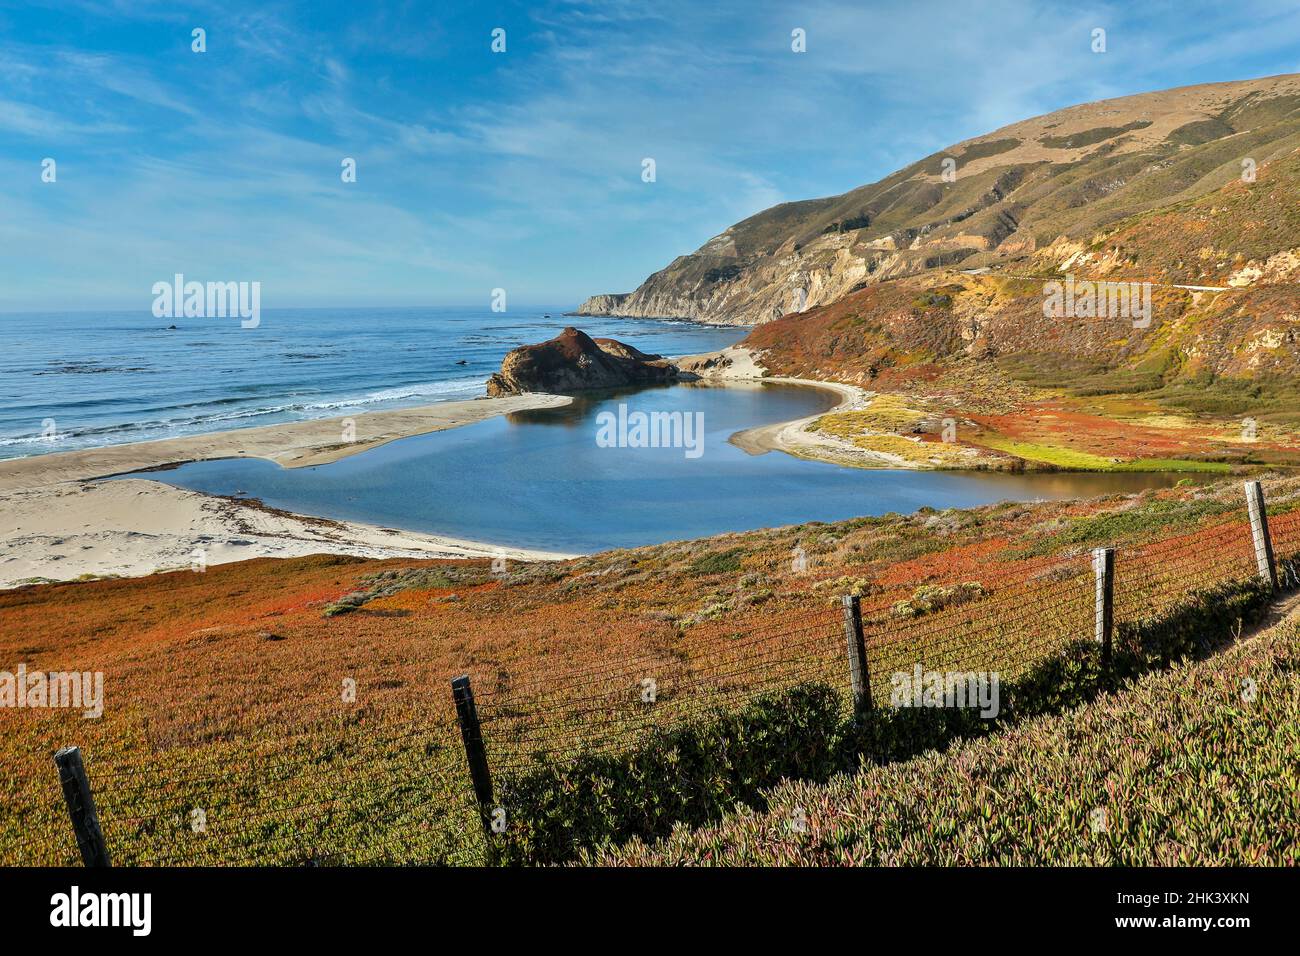 United States, California, Big Sur, Hurricane Point, View of the Ocean Along the Coast Stock Photo